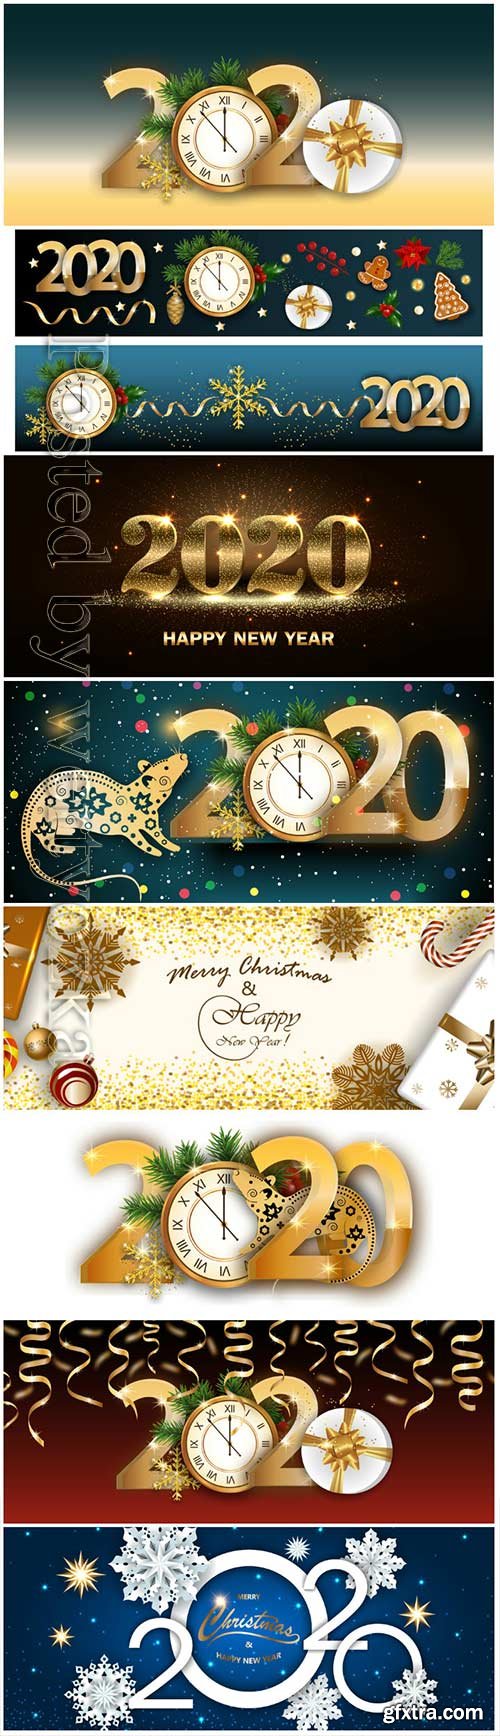 2020 Merry Chistmas and Happy New Year vector illustration # 12